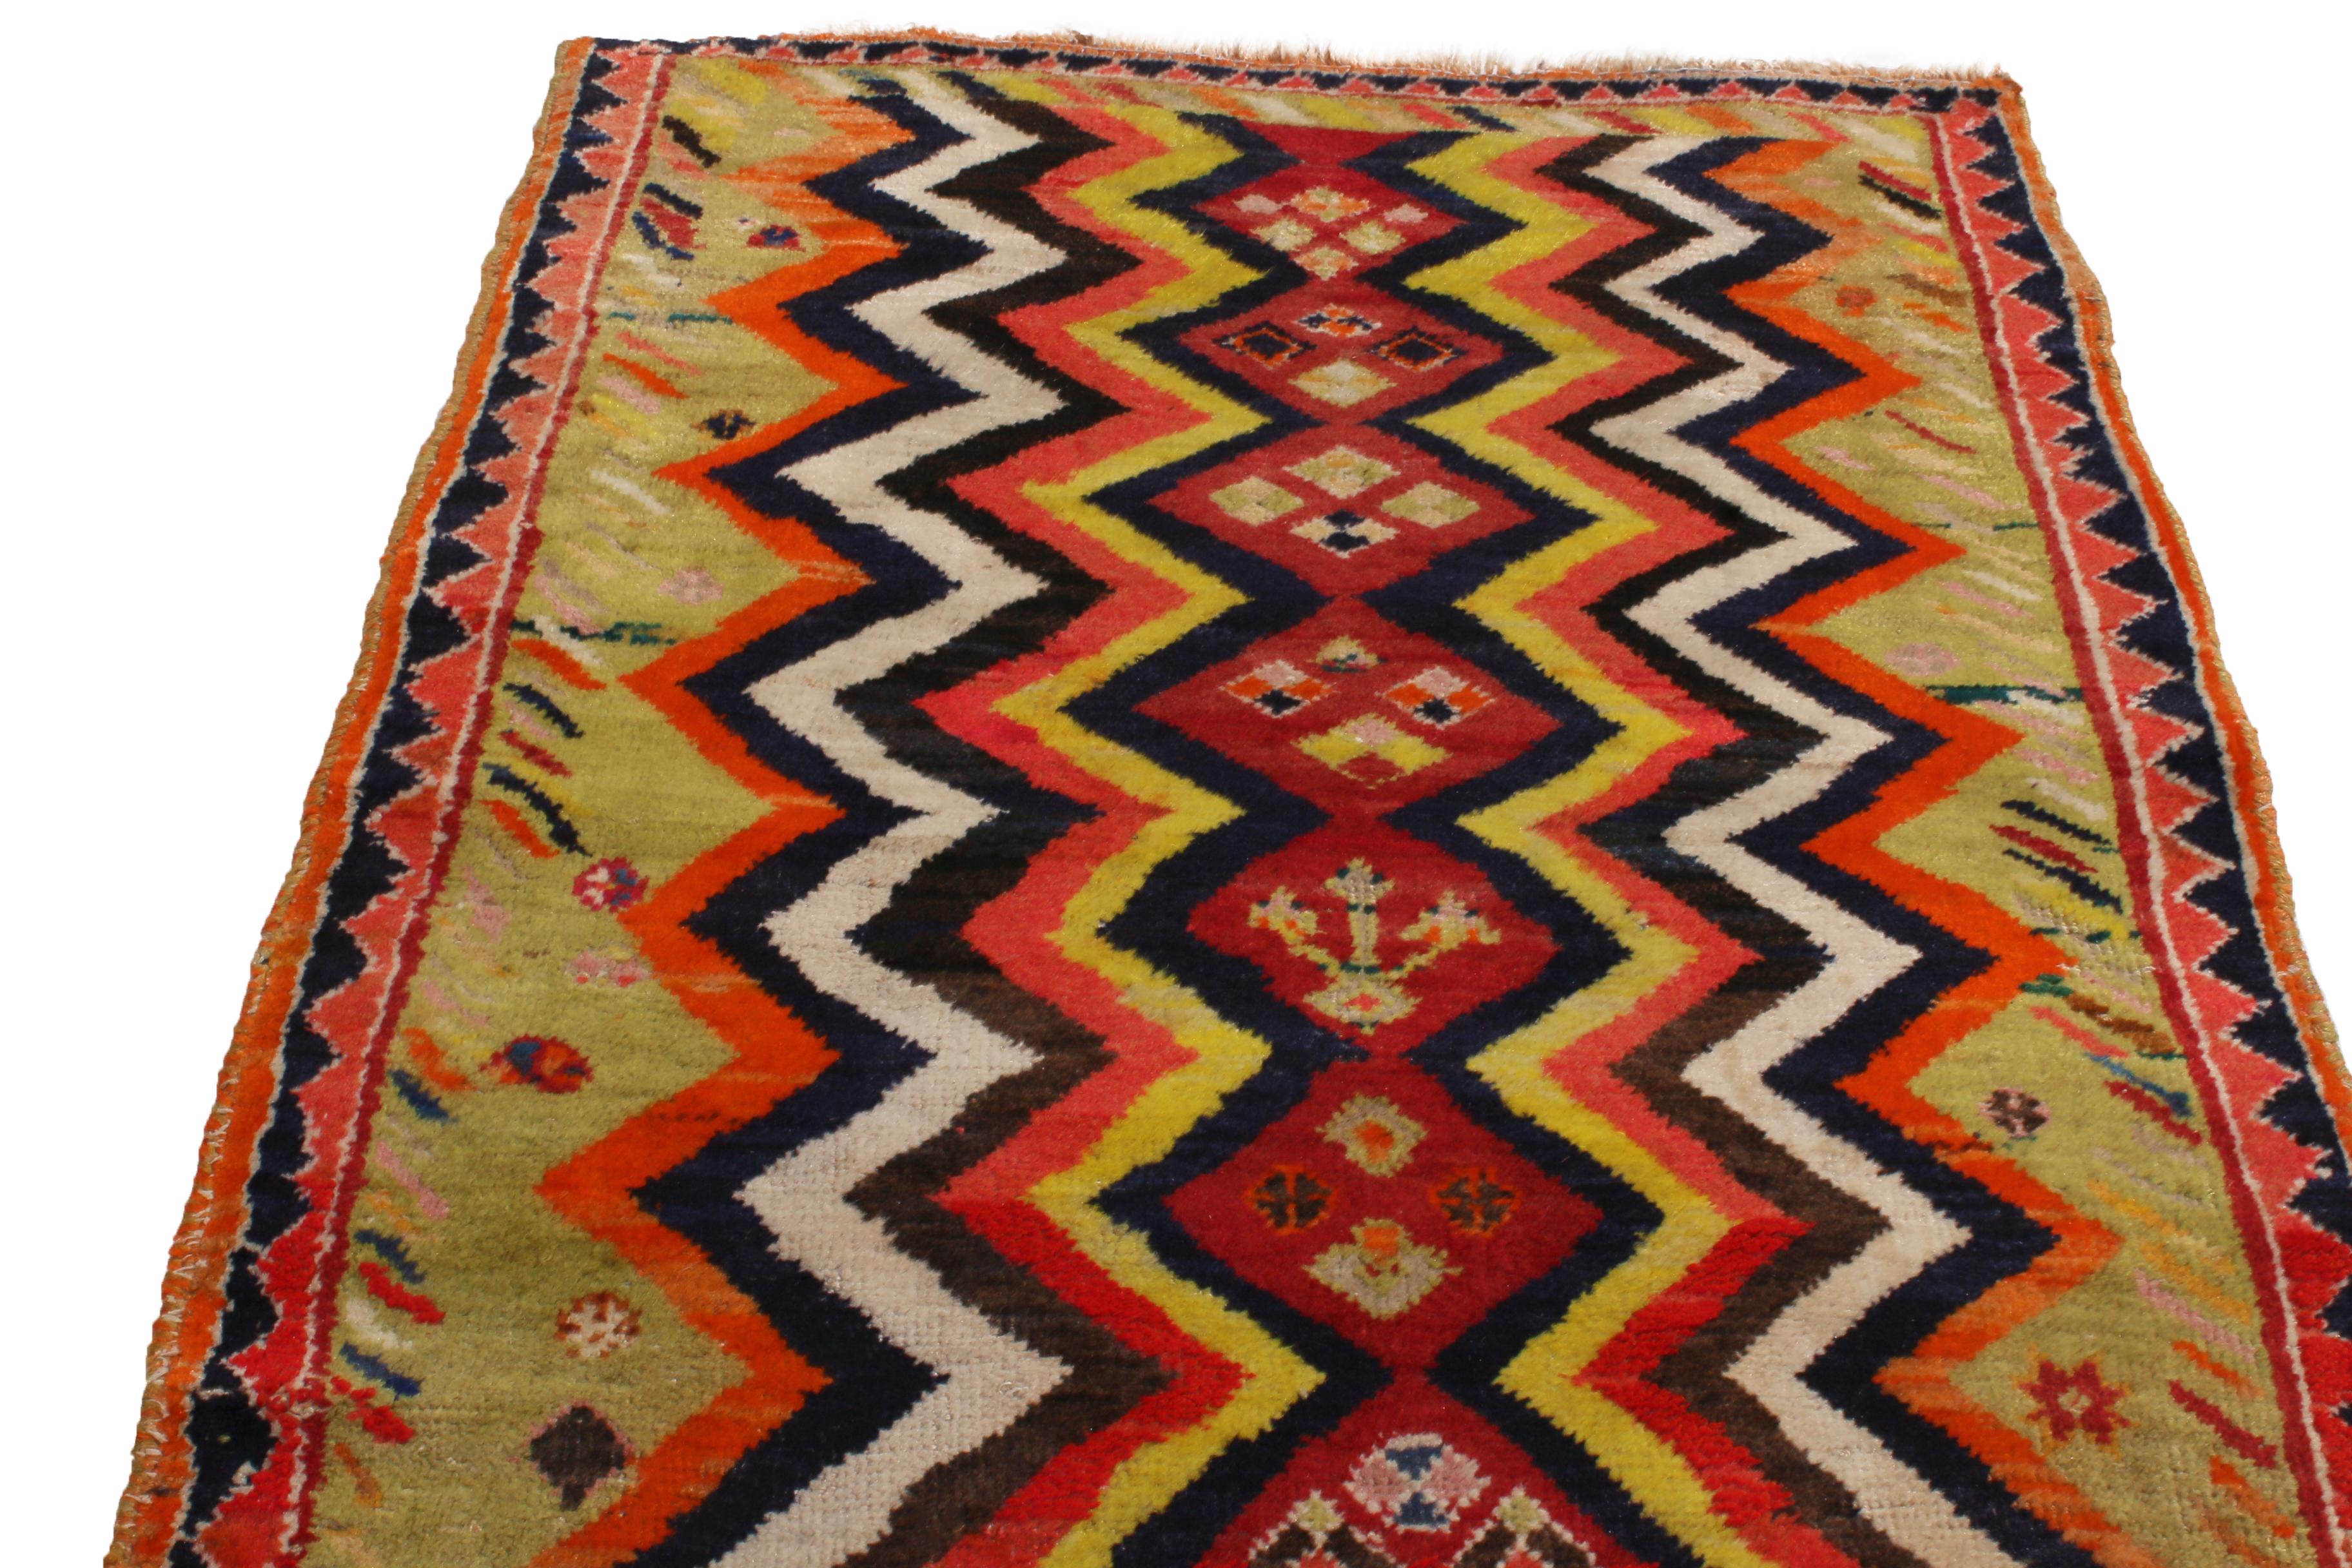 Originating from Persia between 1900-1910, this antique hand knotted Gabbeh wool rug hosts a unique variety of unfolding sawtooth and artwork borders, complementing the Chevron field pattern with a unique array of tribal. Green, red, orange, yellow,